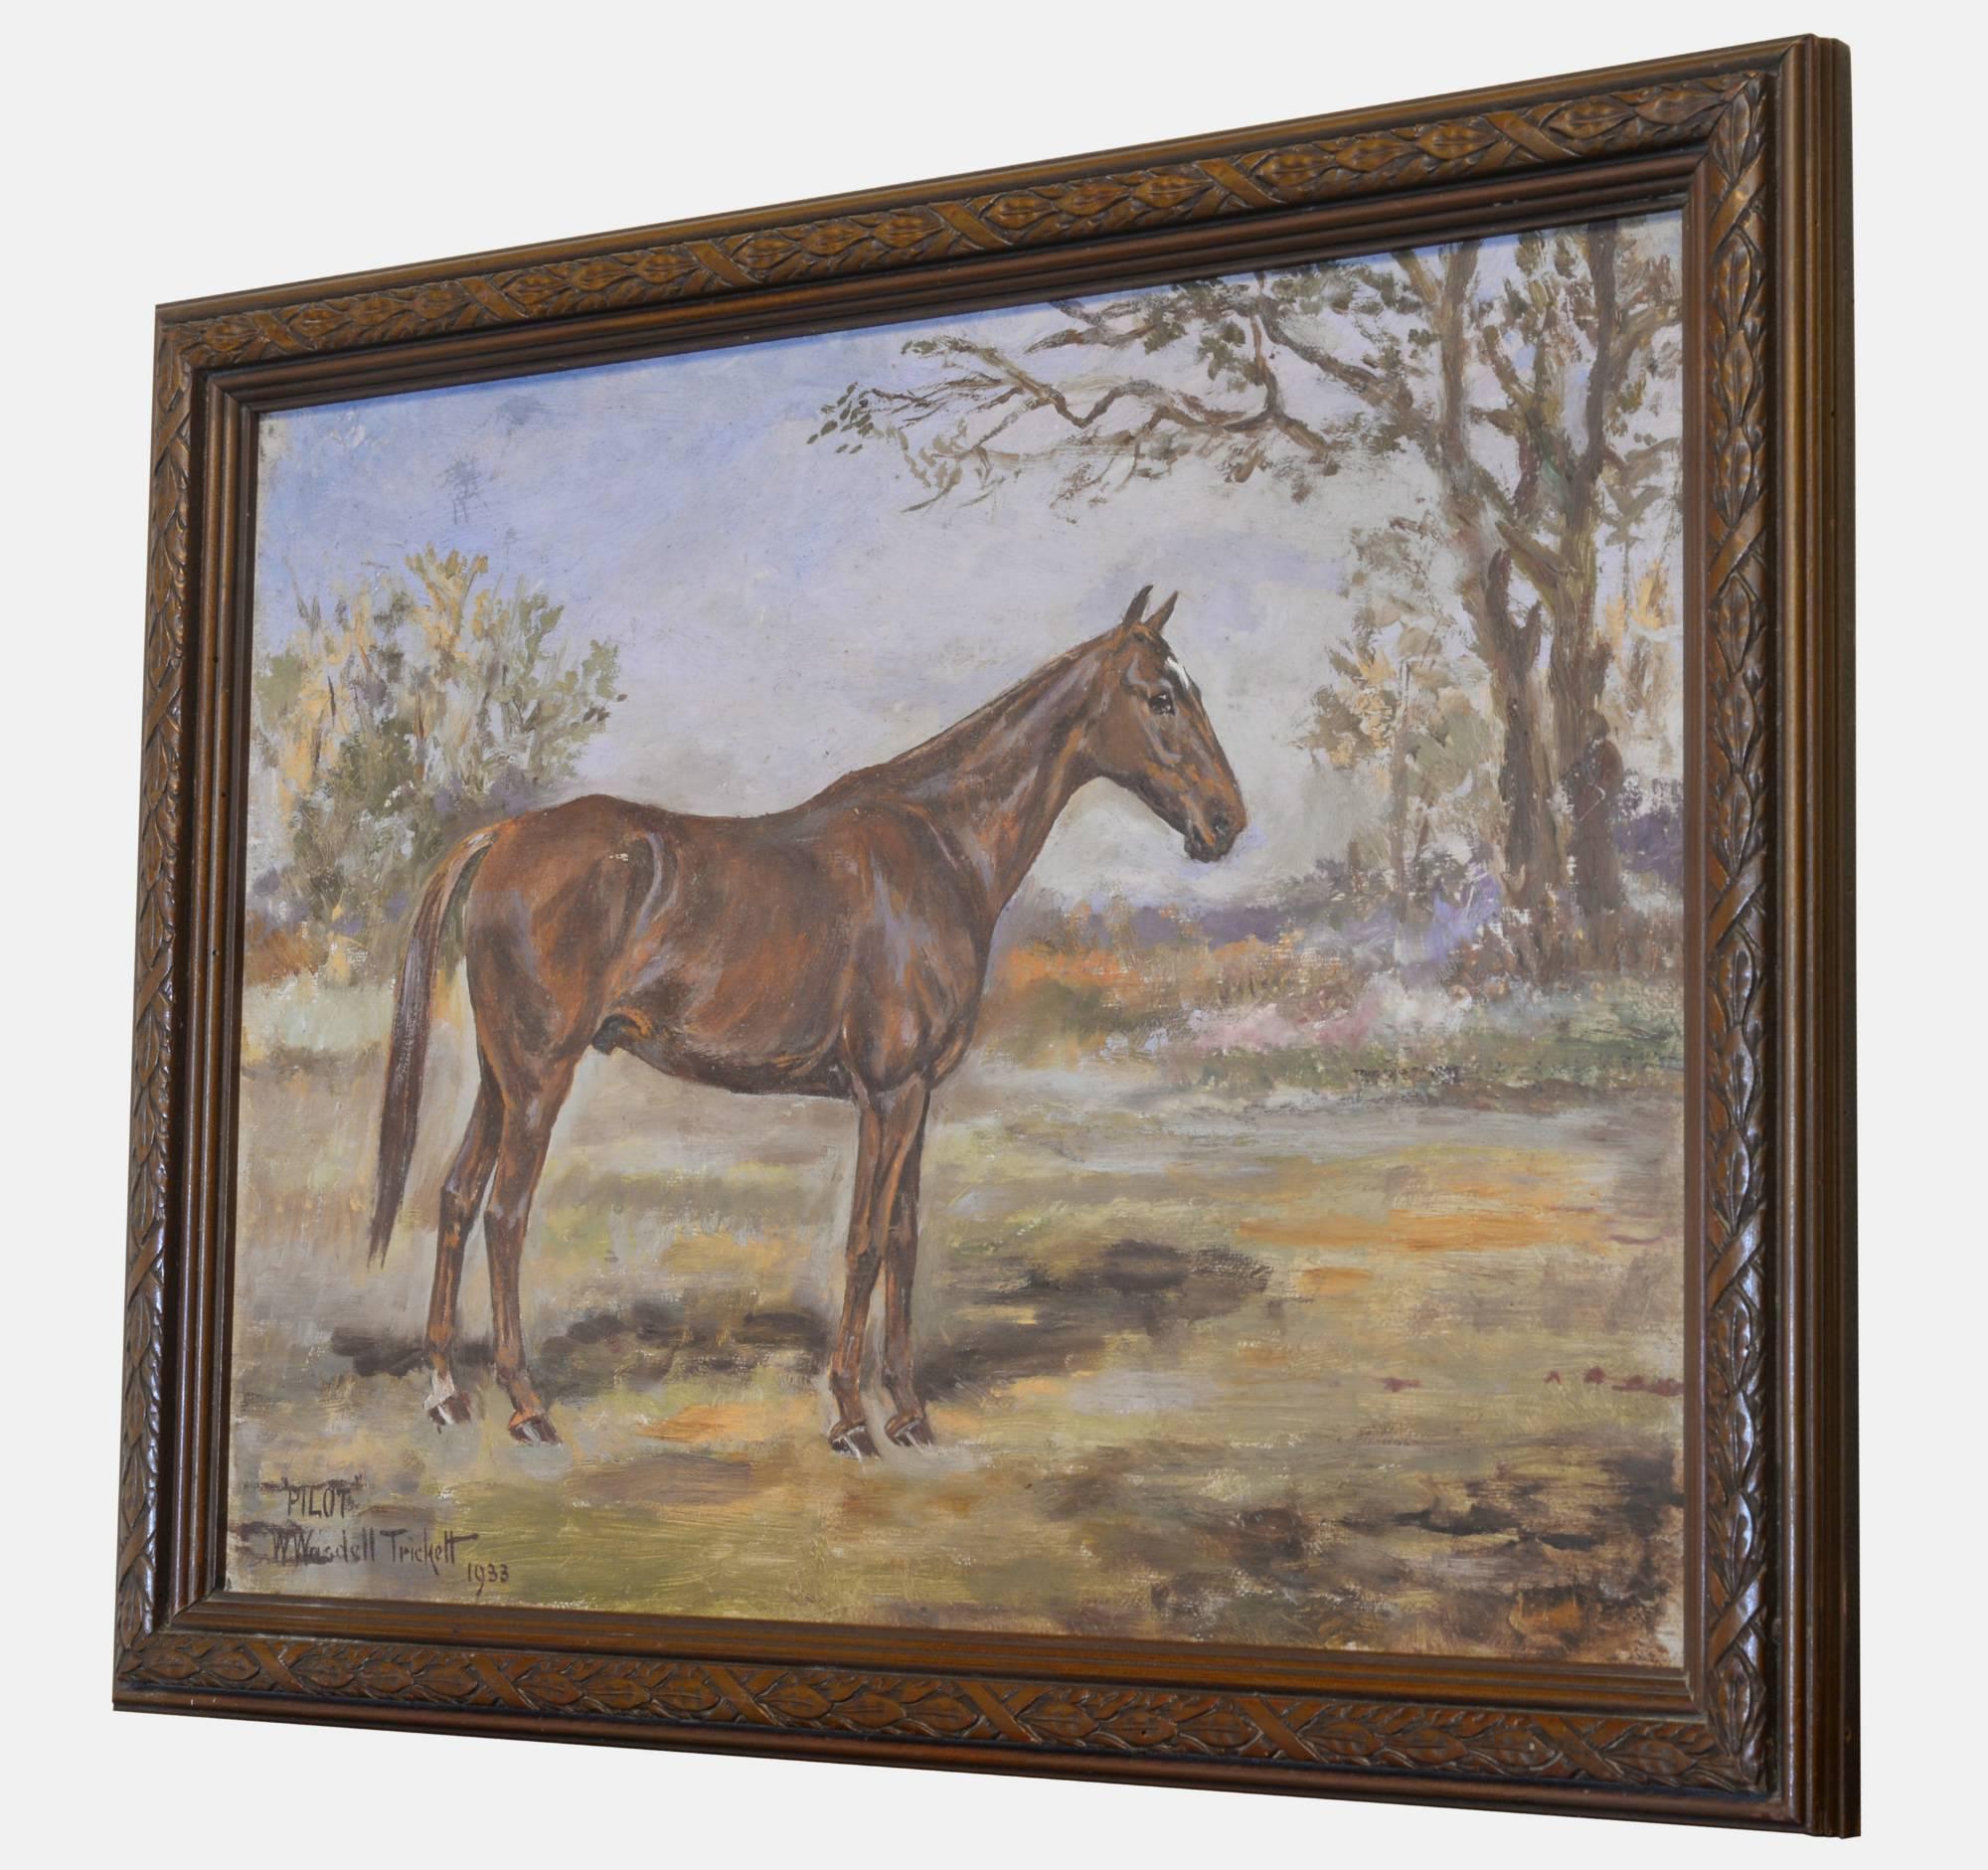 An oil on canvas equestrian painting of 'Pilot' in a landscape. By W. Wasdell Trickett.

Signed and dated 1933.